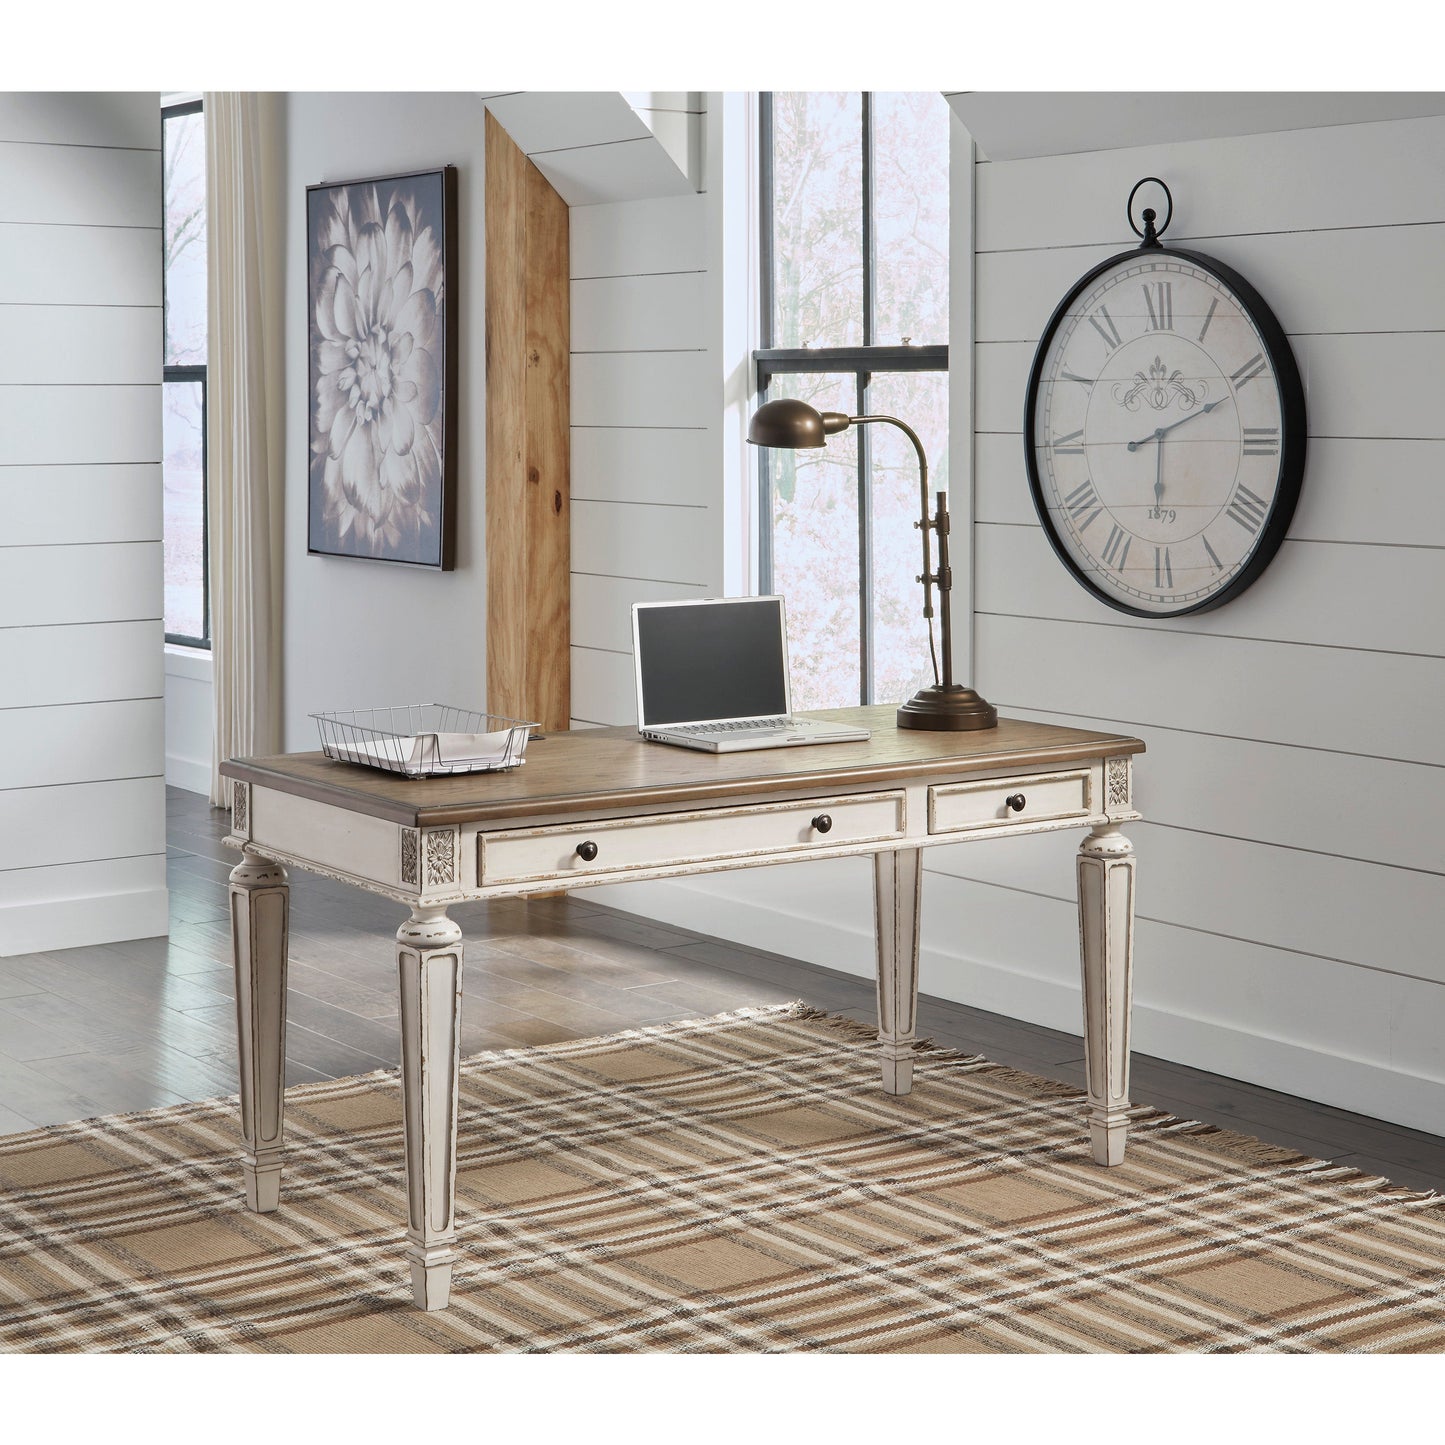 REALYN 60" HOME OFFICE DESK - WHITE/BROWN